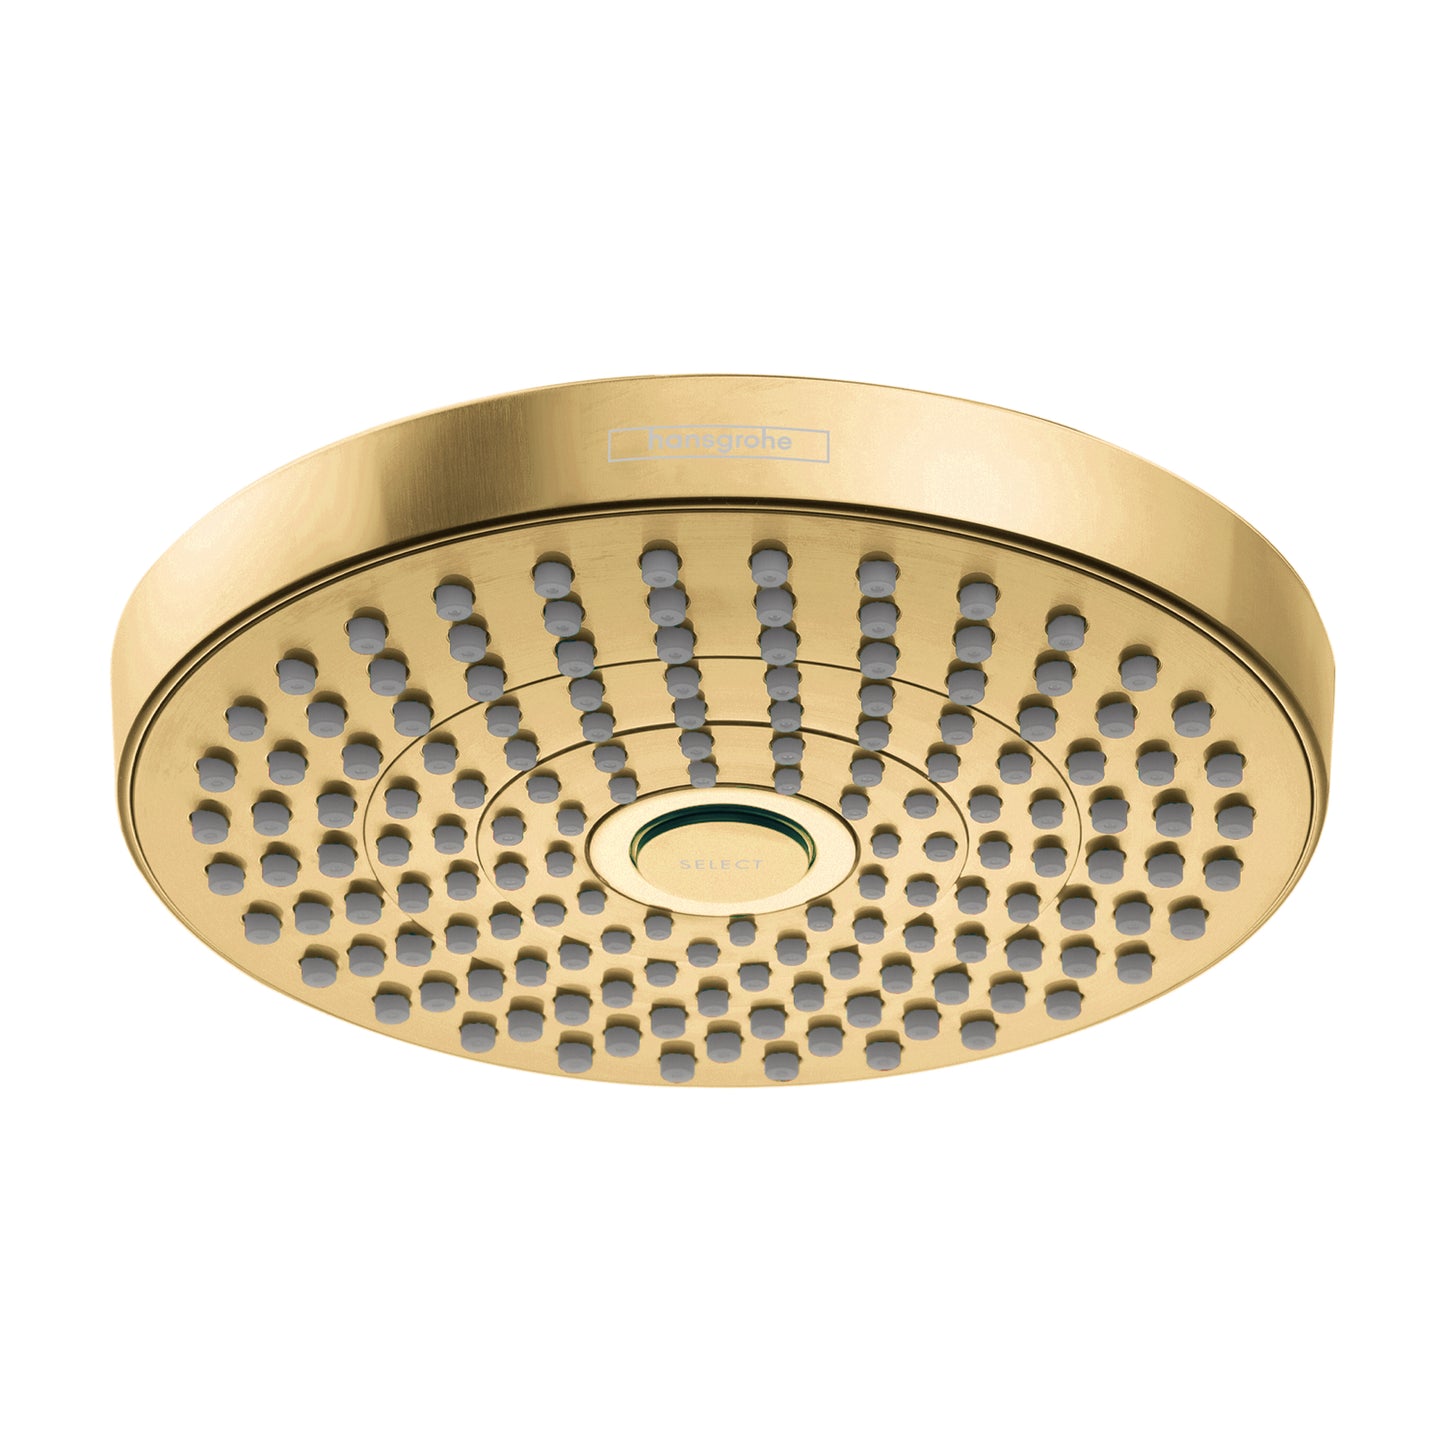 HANSGROHE 04825250 Brushed Gold Optic Croma Select S Showerhead 2.5 GPM